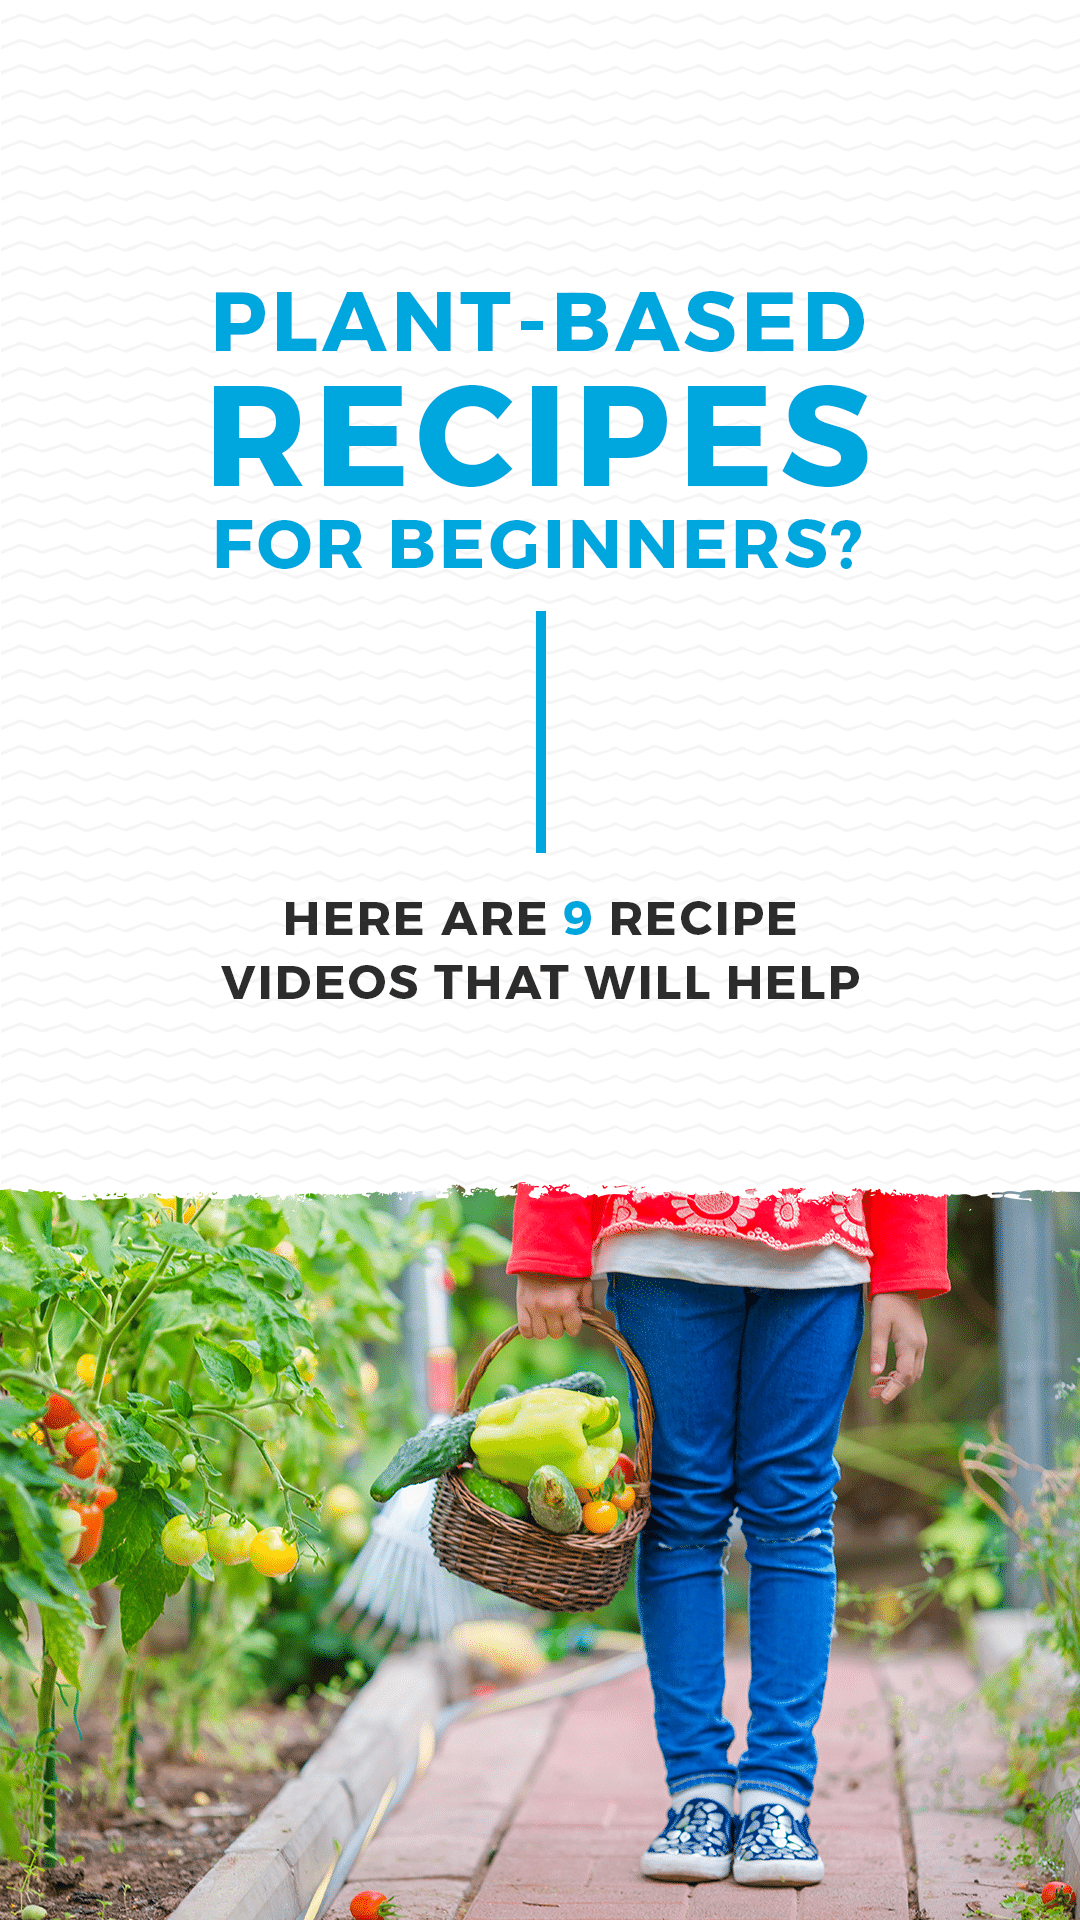 Plant-Based Recipes for Beginners? Here Are 9 Recipe Videos That Will Help